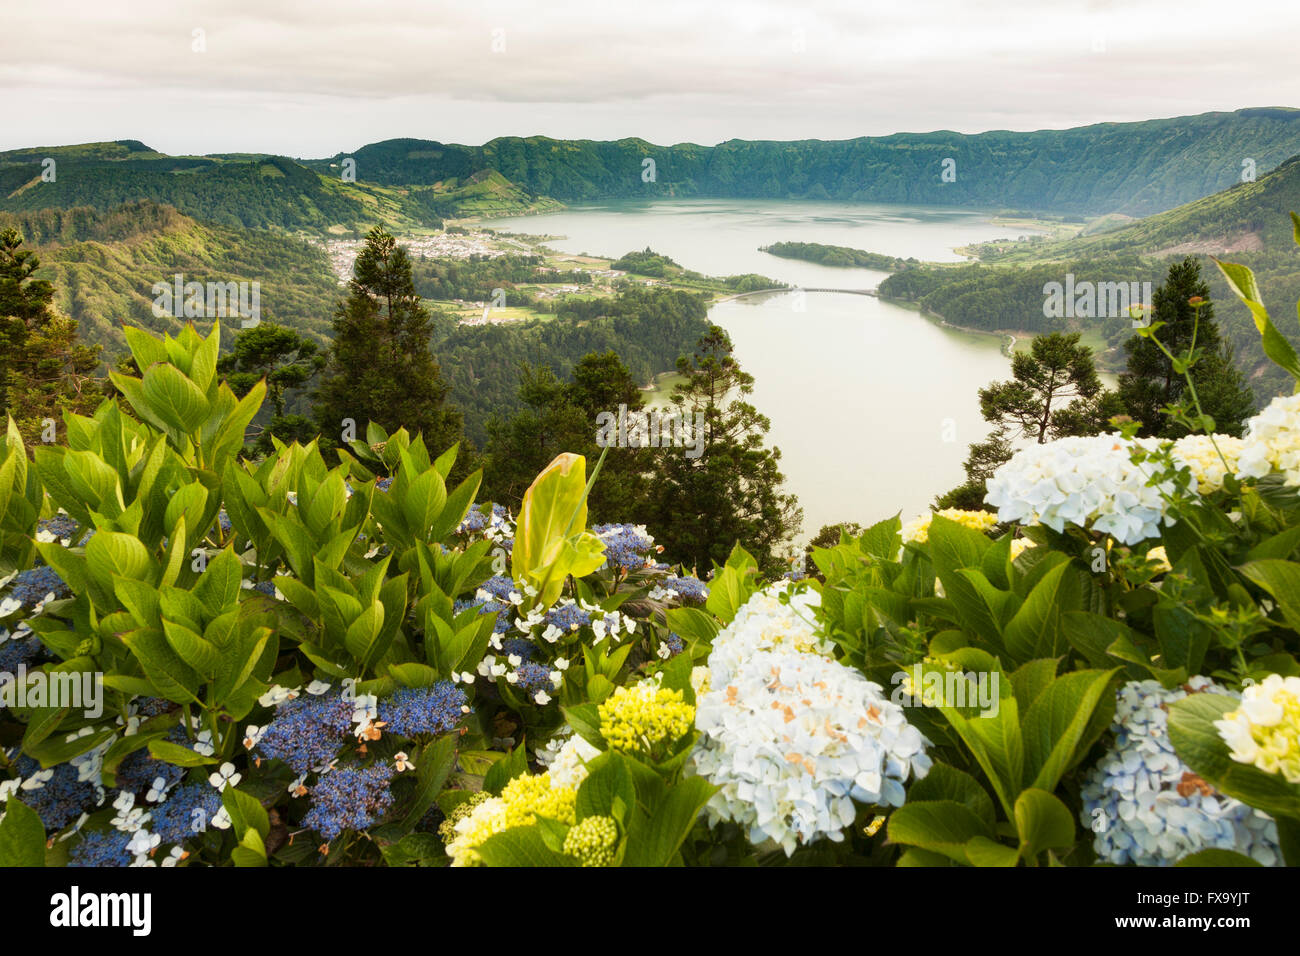 Caldera of Sete Cidades with its two lakes, Sao Miguel island, Azores. Hydrangea flowers in foreground. Stock Photo